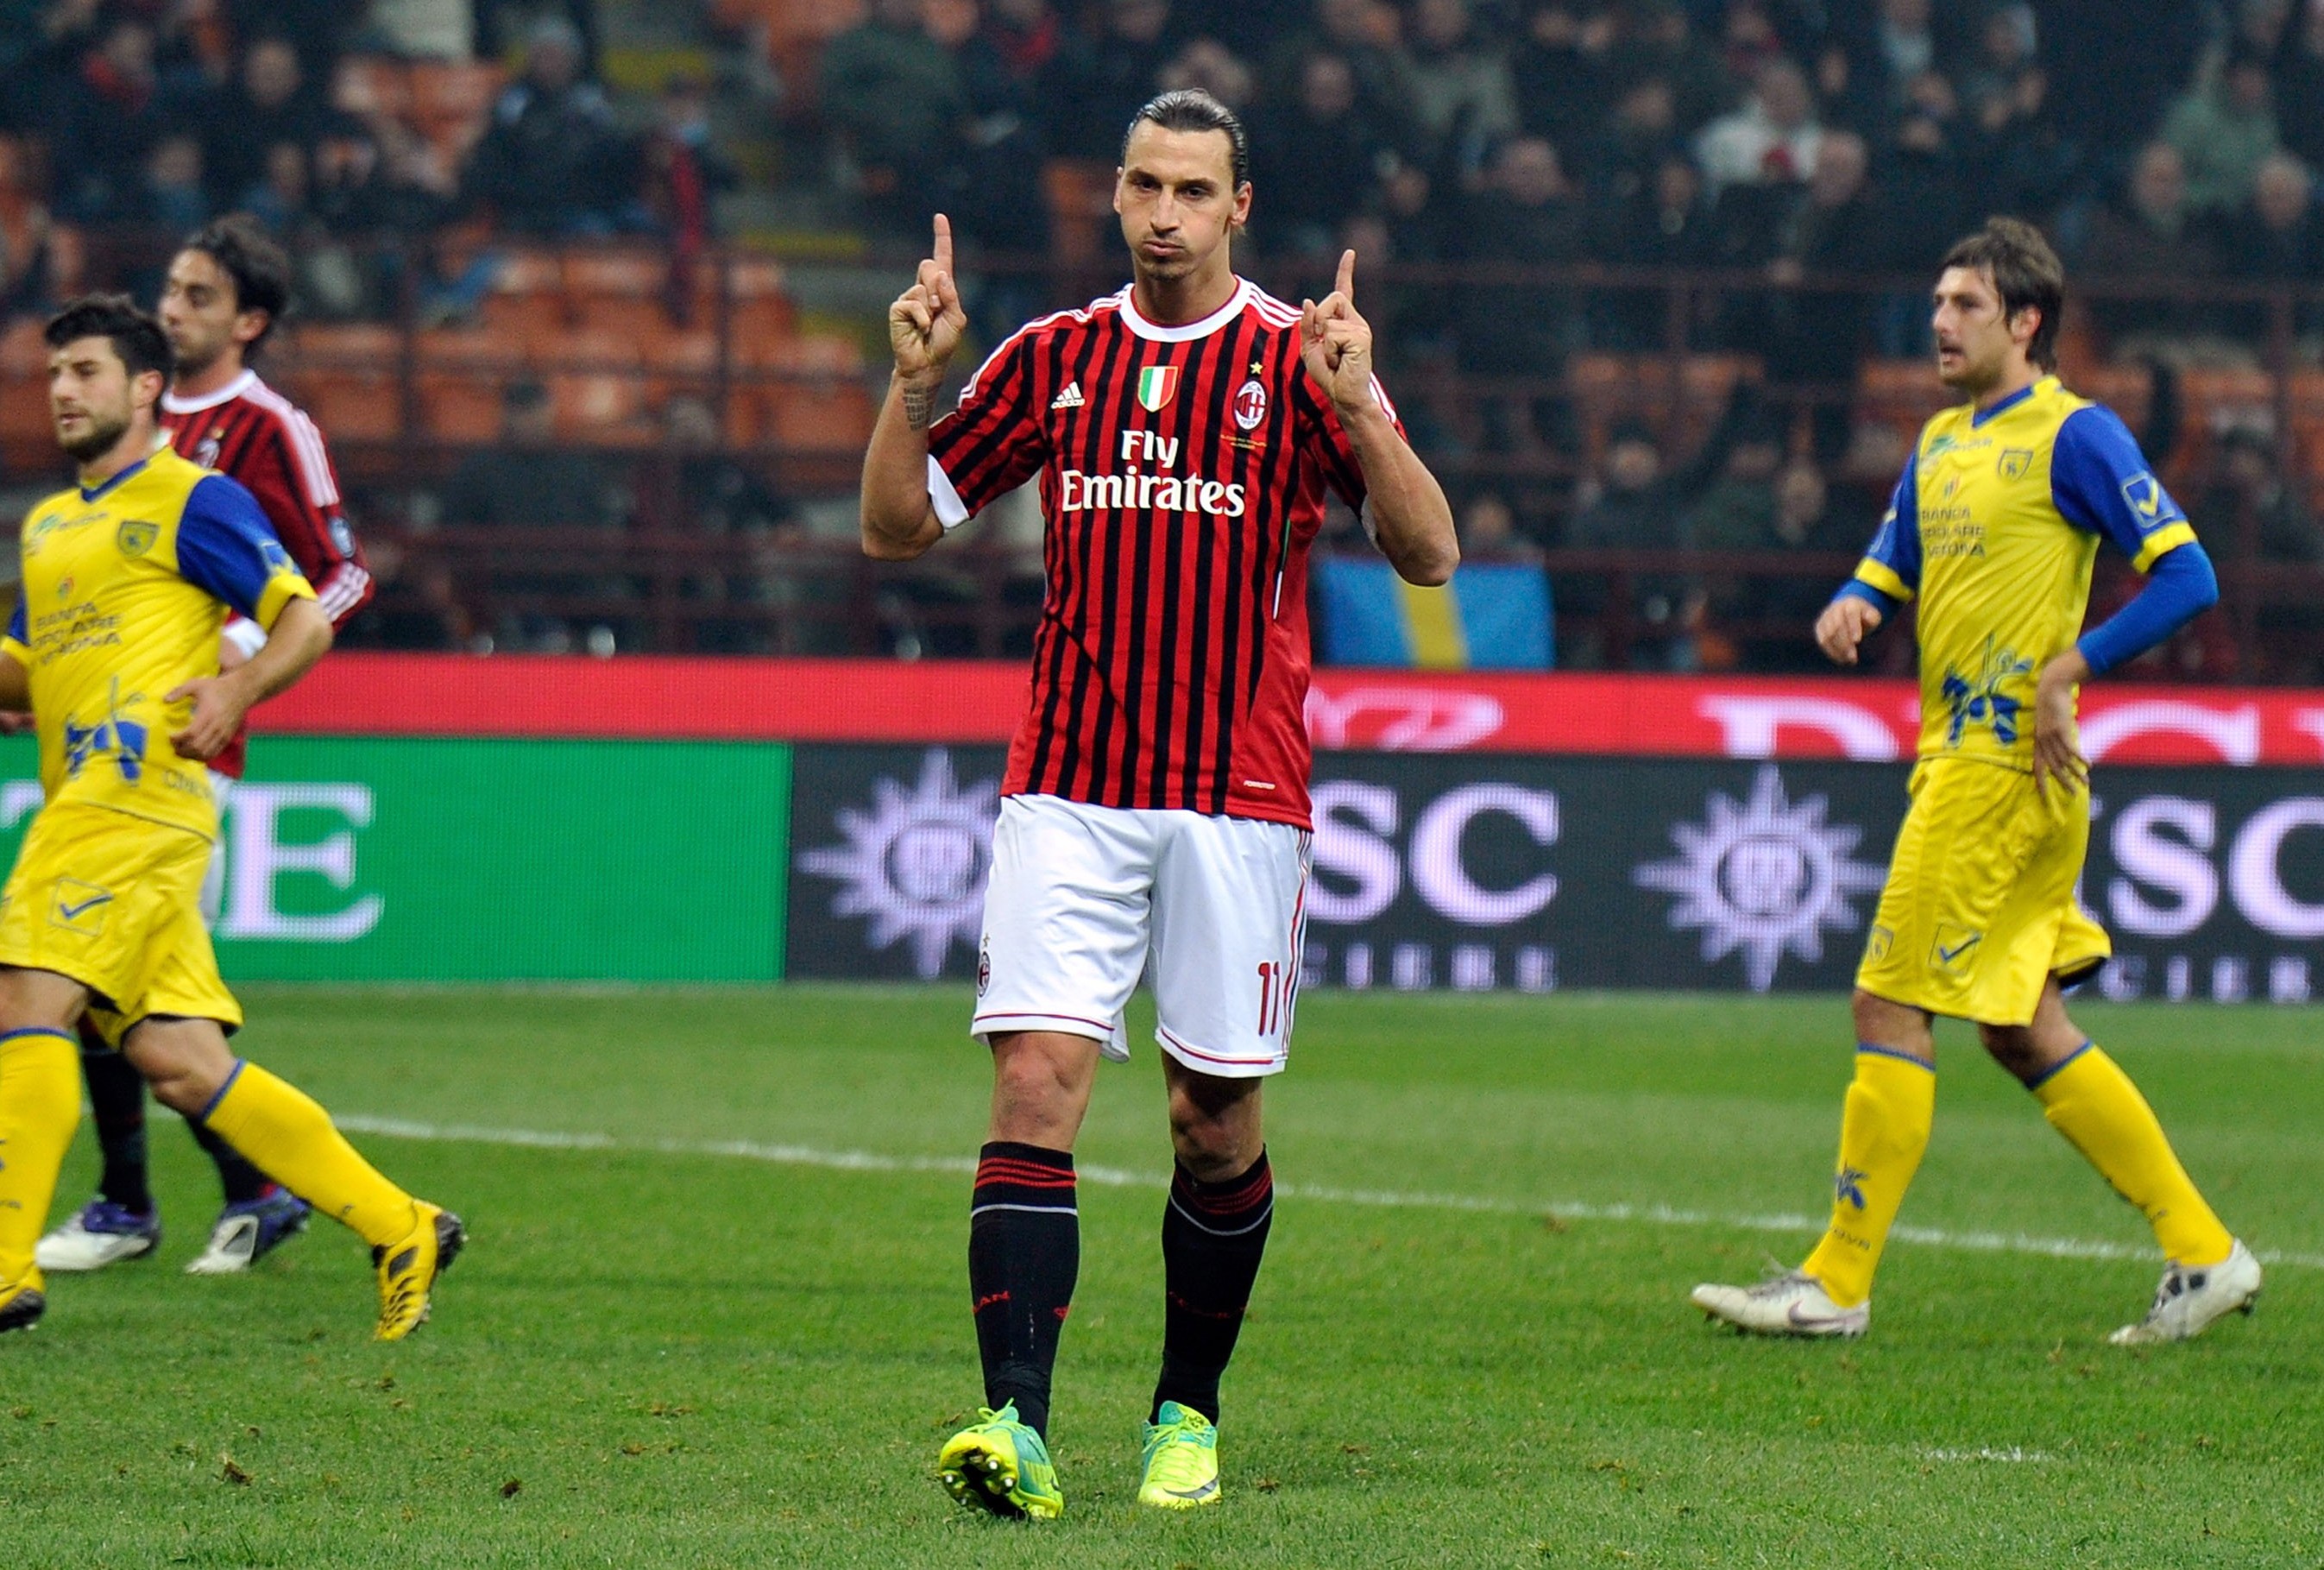 Bwin suspend betting on next club; Milan heavily